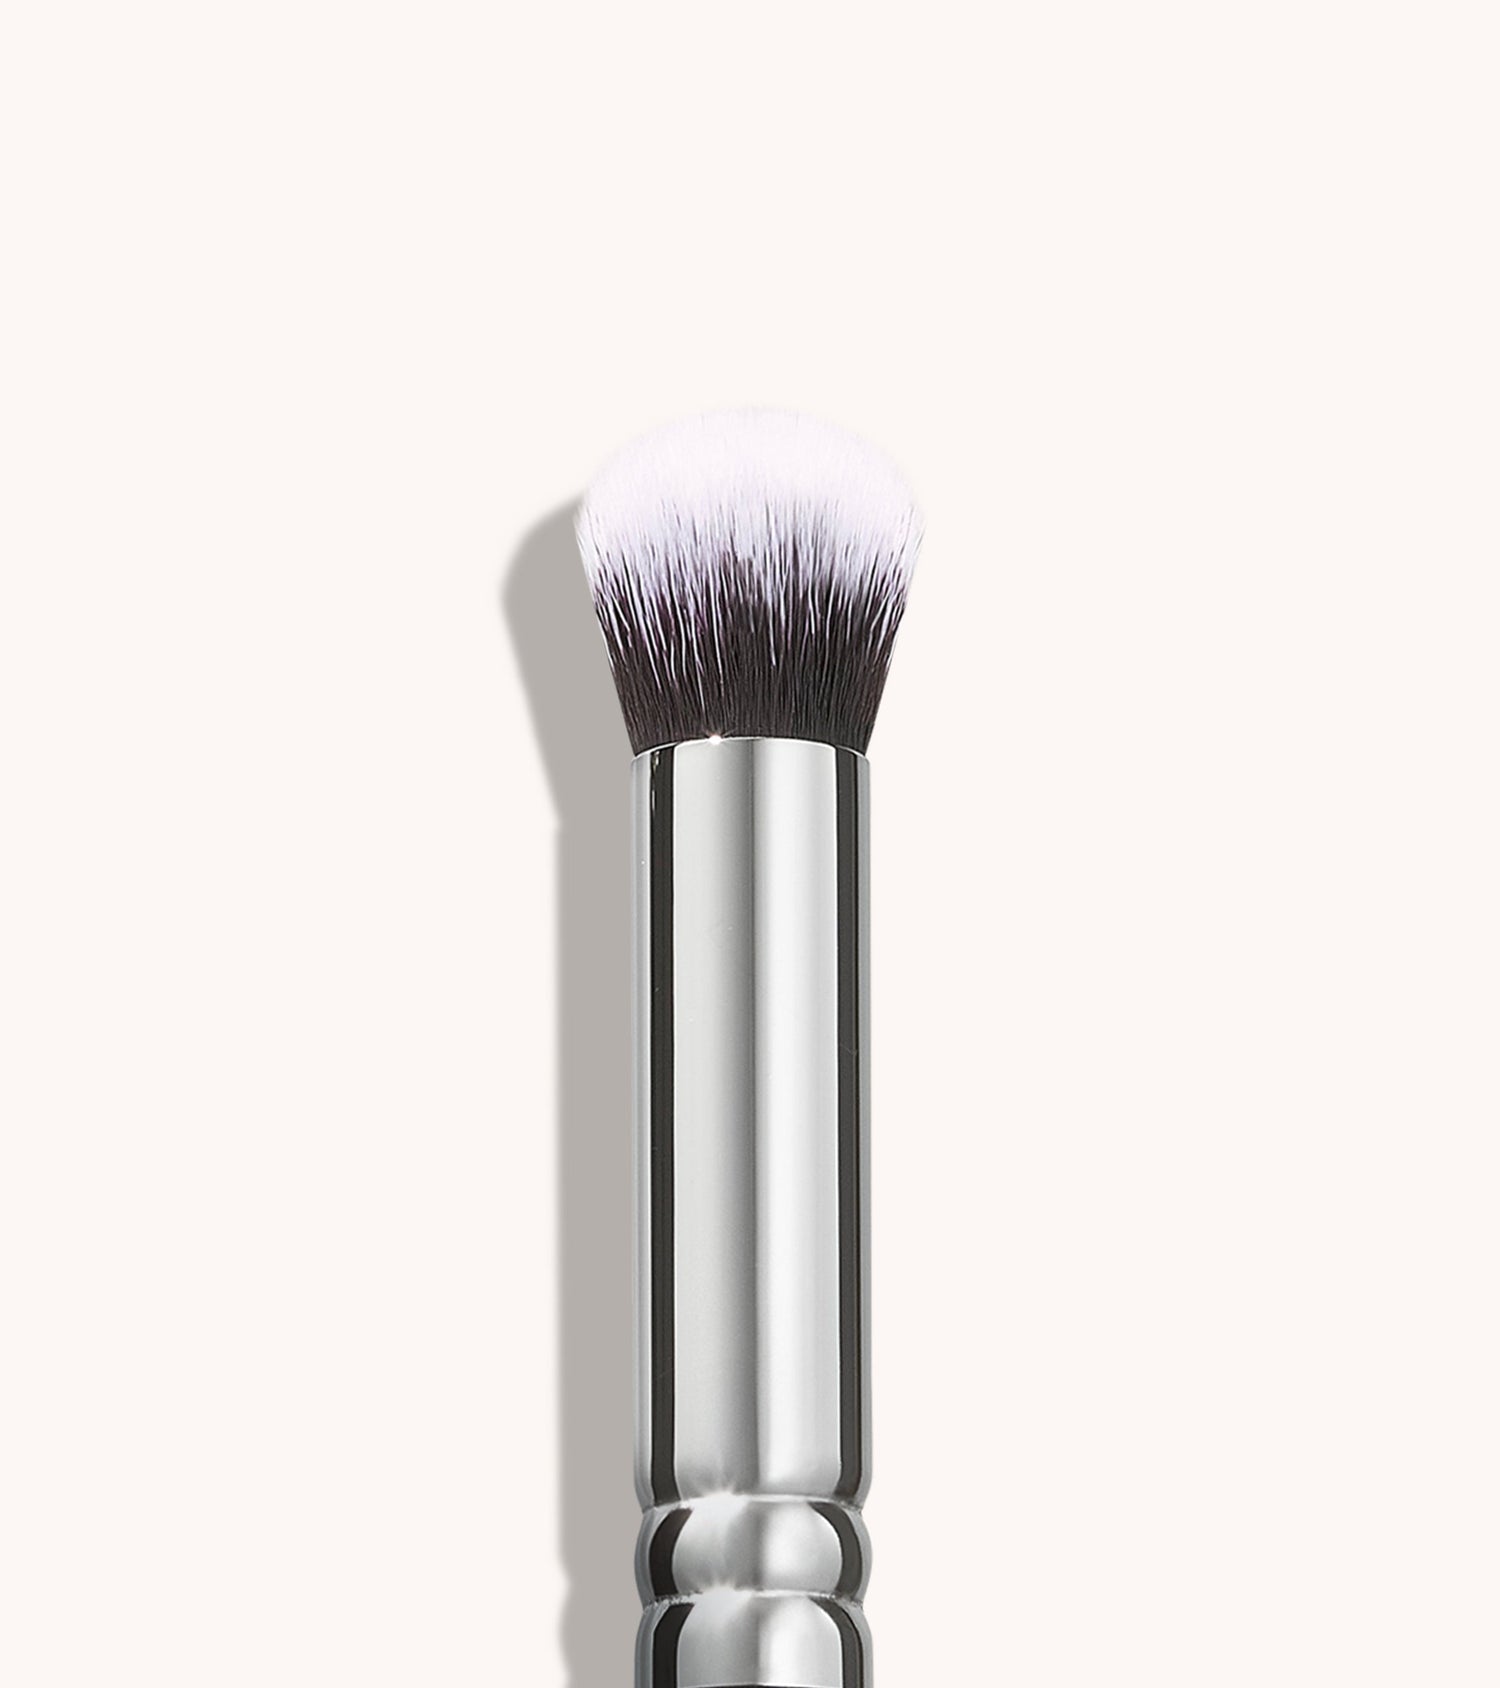 142 Concealer Buffer Brush Main Image featured